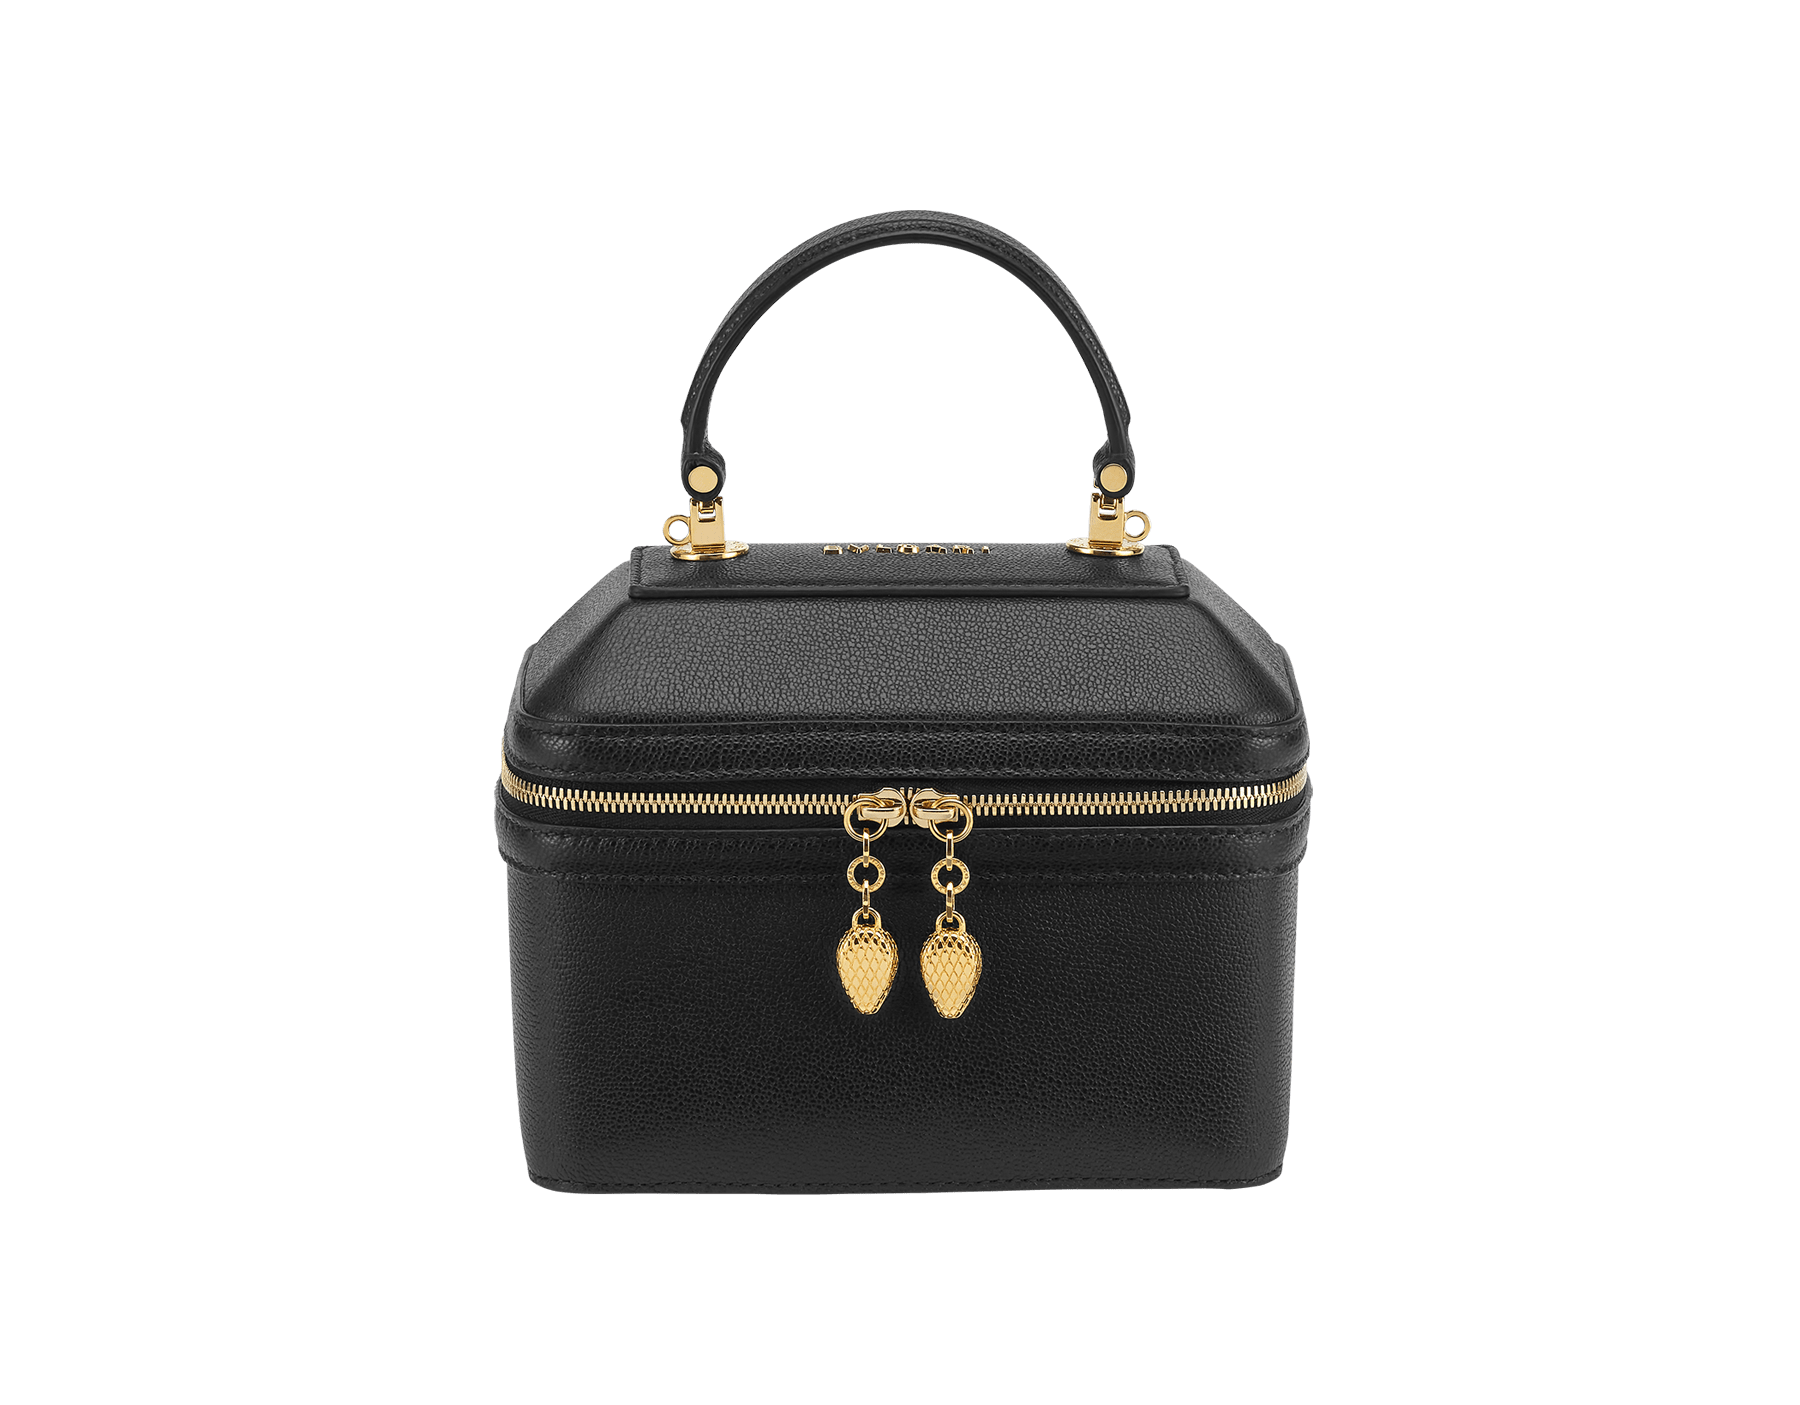 Serpenti Forever jewelry box bag in twilight sapphire blue Urban grain calf leather with Niagara sapphire blue nappa leather lining. Captivating snakehead zip pullers and chain strap decors in light gold-plated brass. 1177-UCL image 1